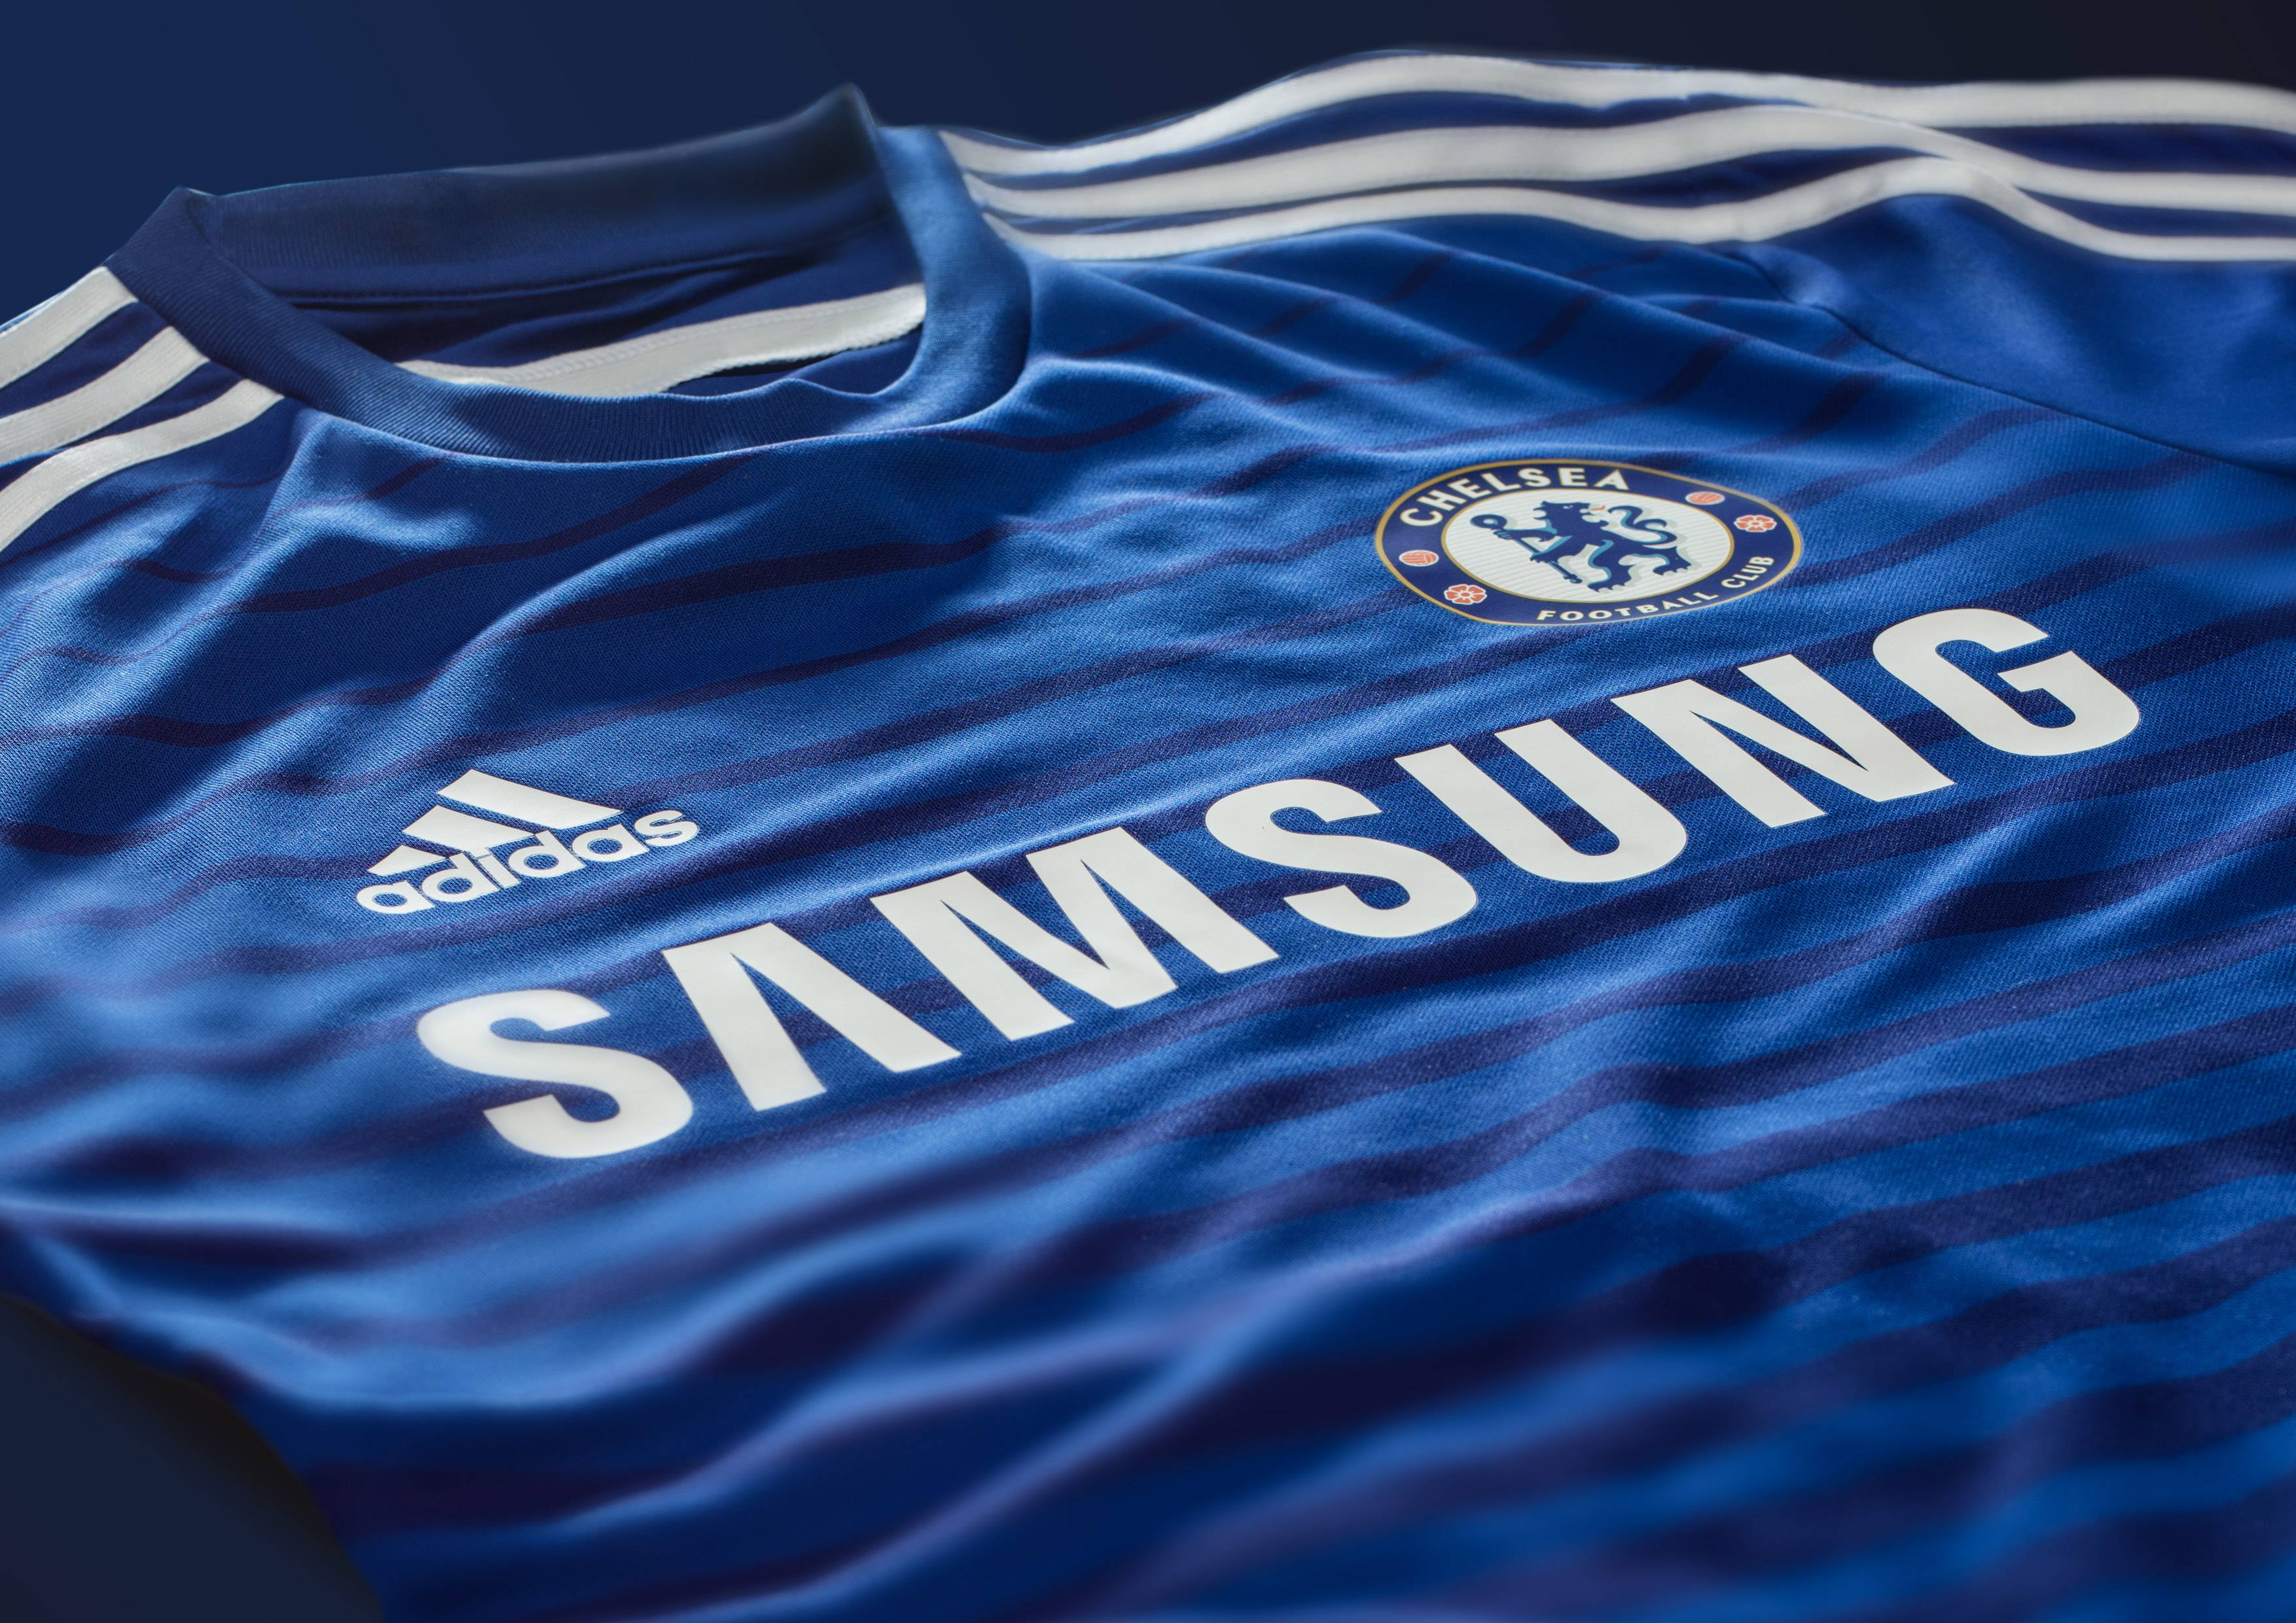 Chelsea 2014 15 Adidas Home Shirt Kit Wallpaper Wide Or HD